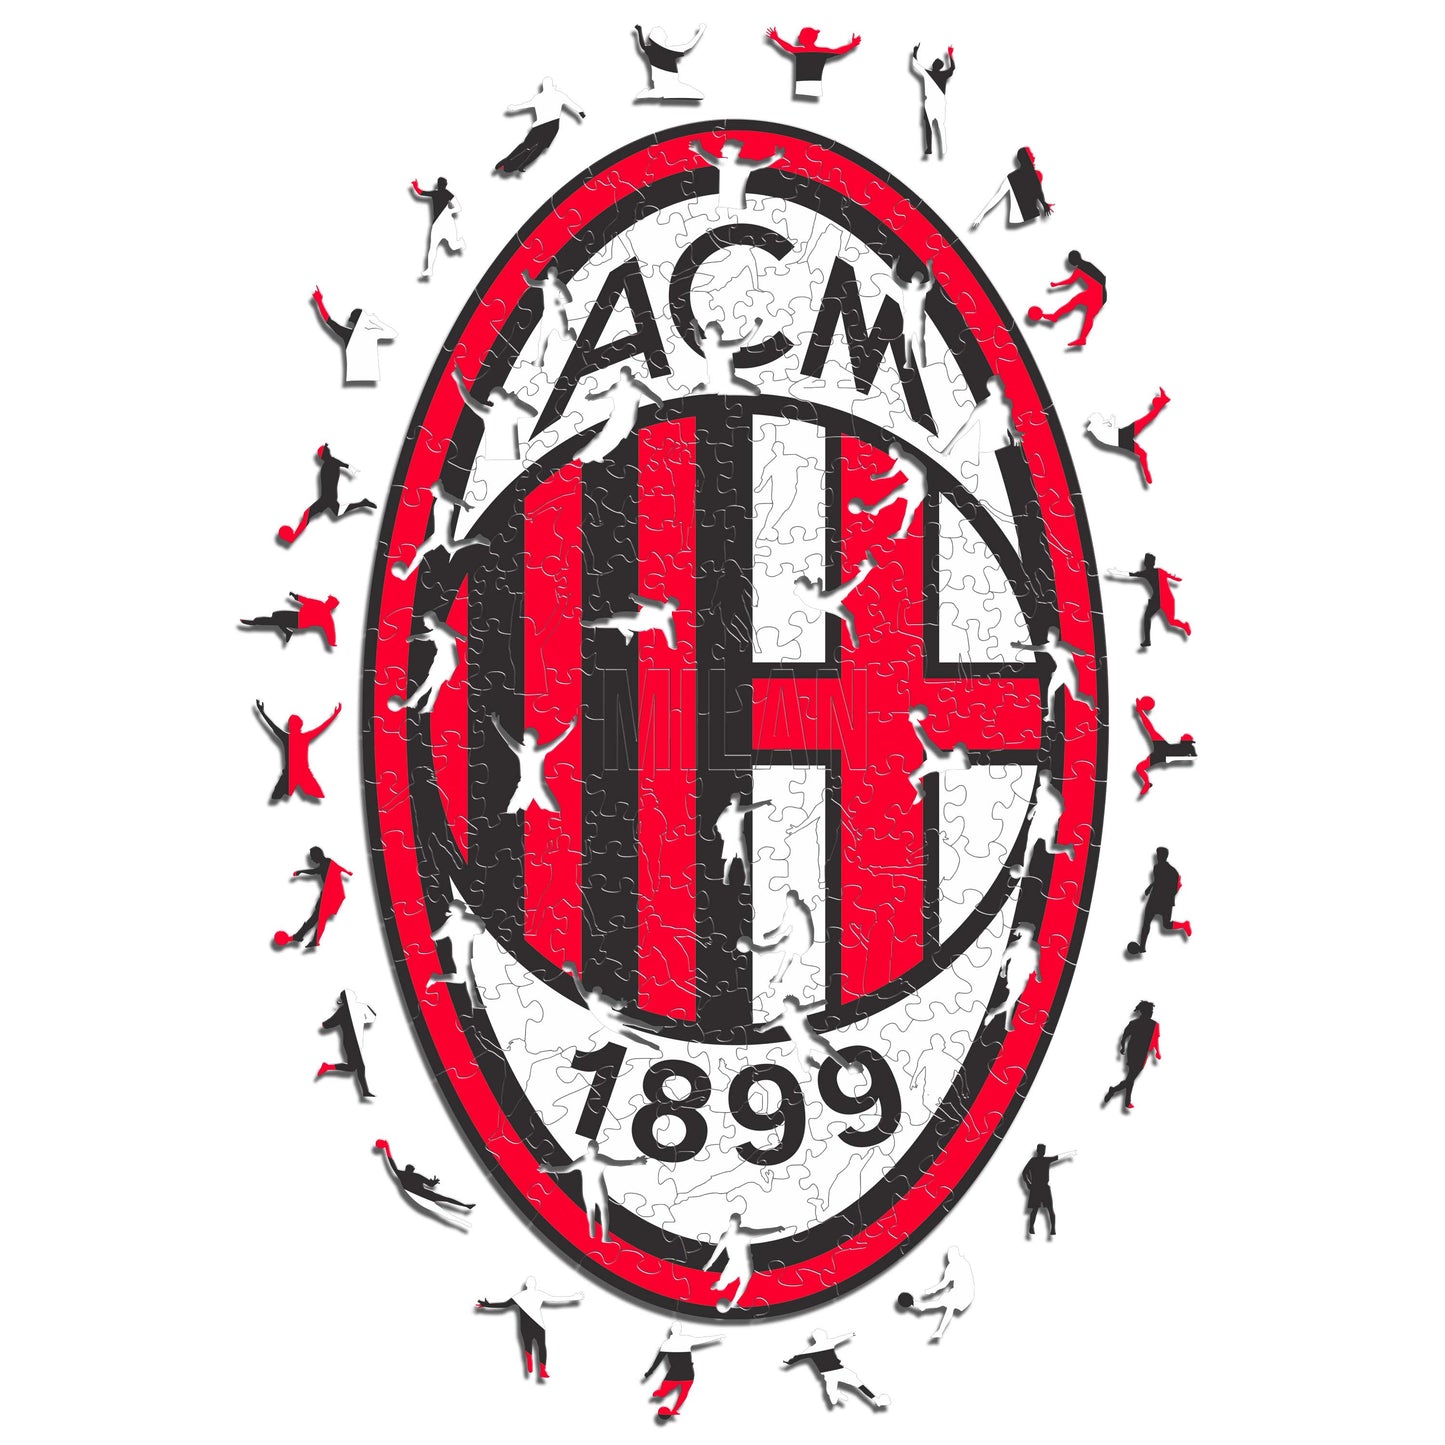 3 PACK AC Milan® Crest + Jersey + 5 Players